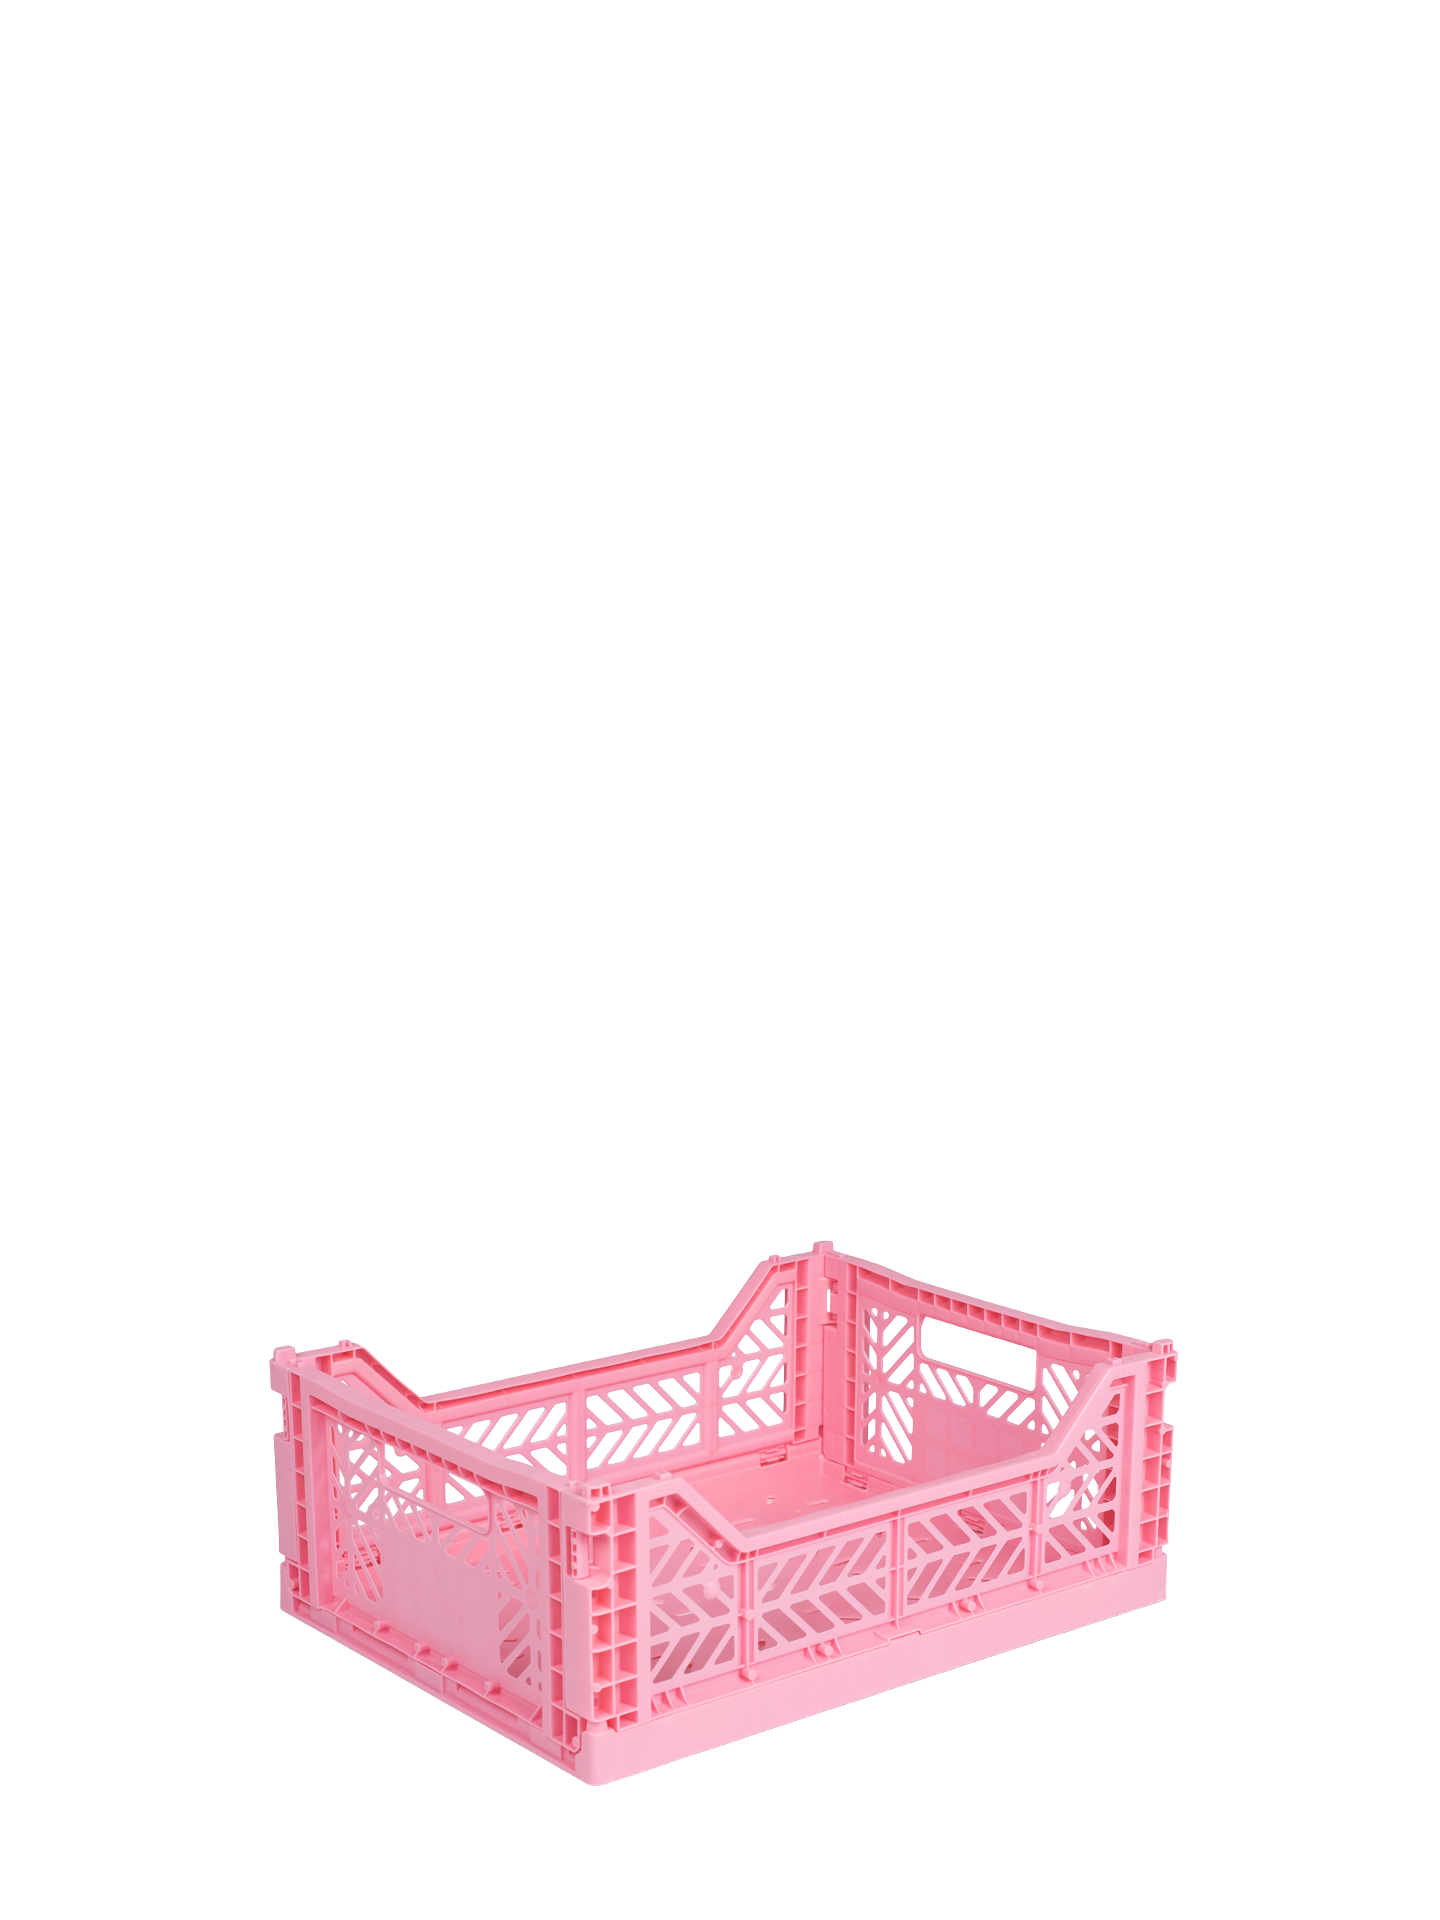 Easy to fold when not in use, the Aykasa medium size plastic storage crate in Baby pink can be stacked on top of each other and the colour range has a perfect hue for any room.